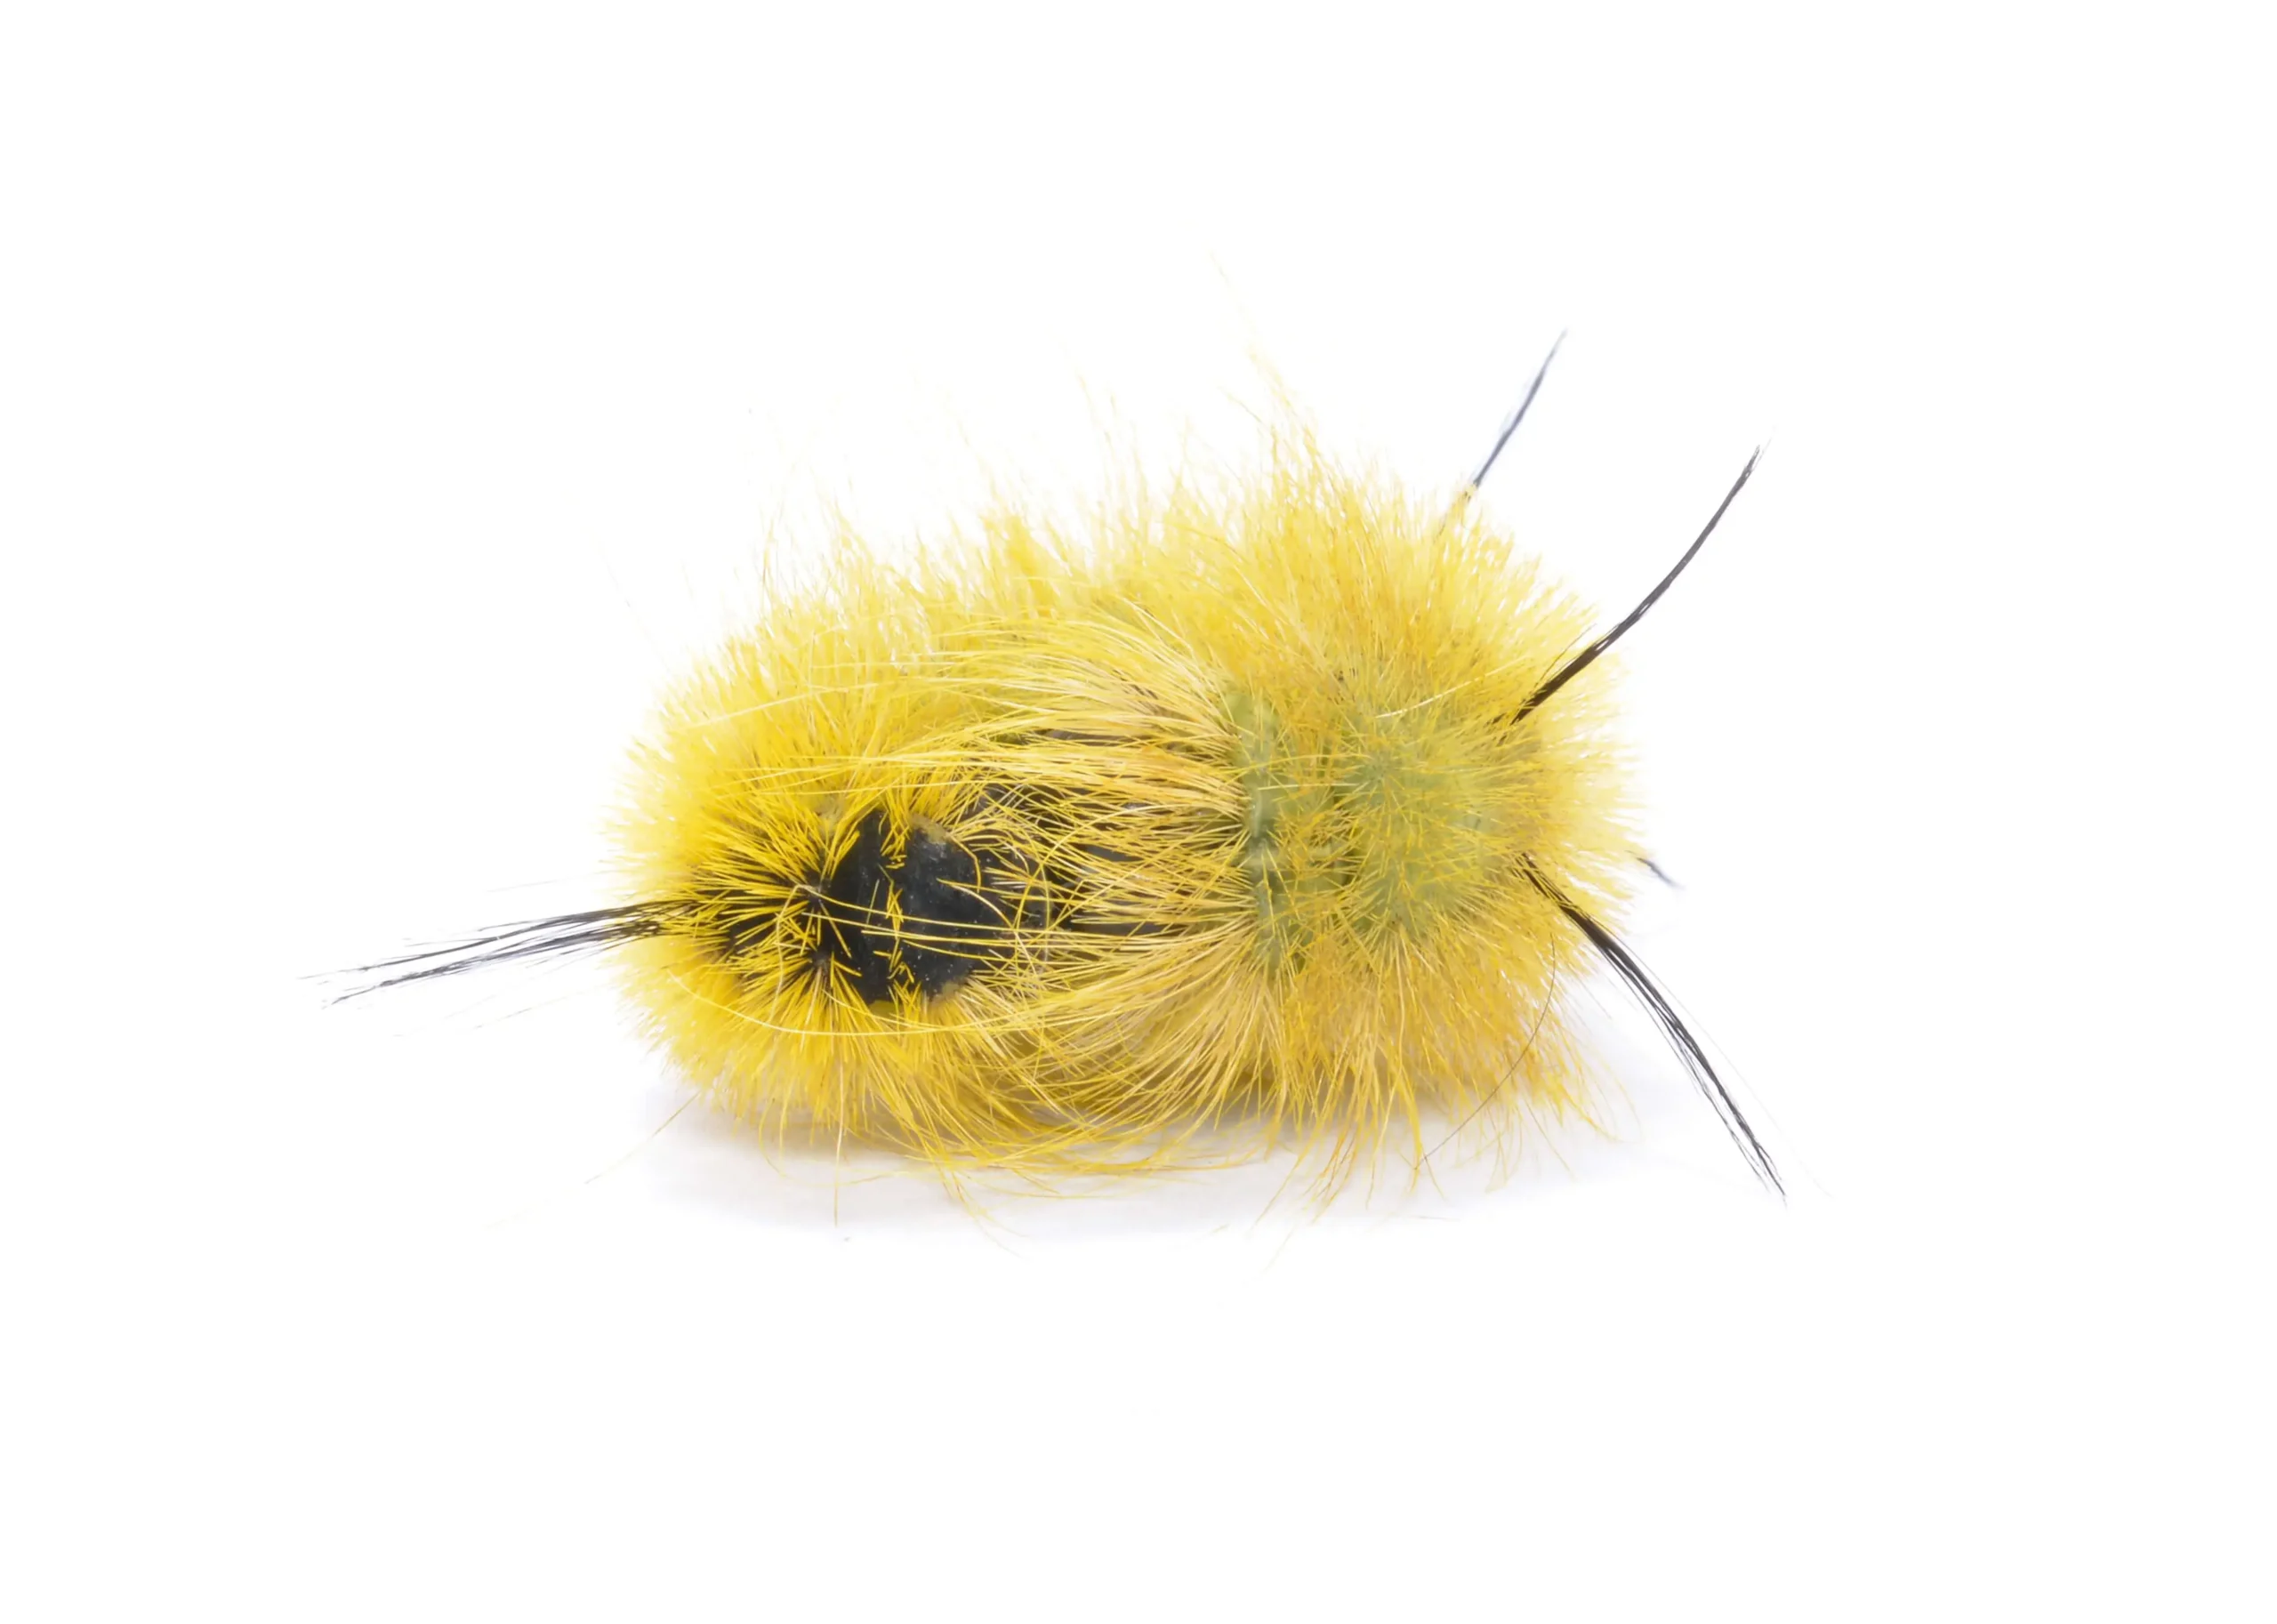 Fuzzy-yellow-caterpillar-with-black-spikes